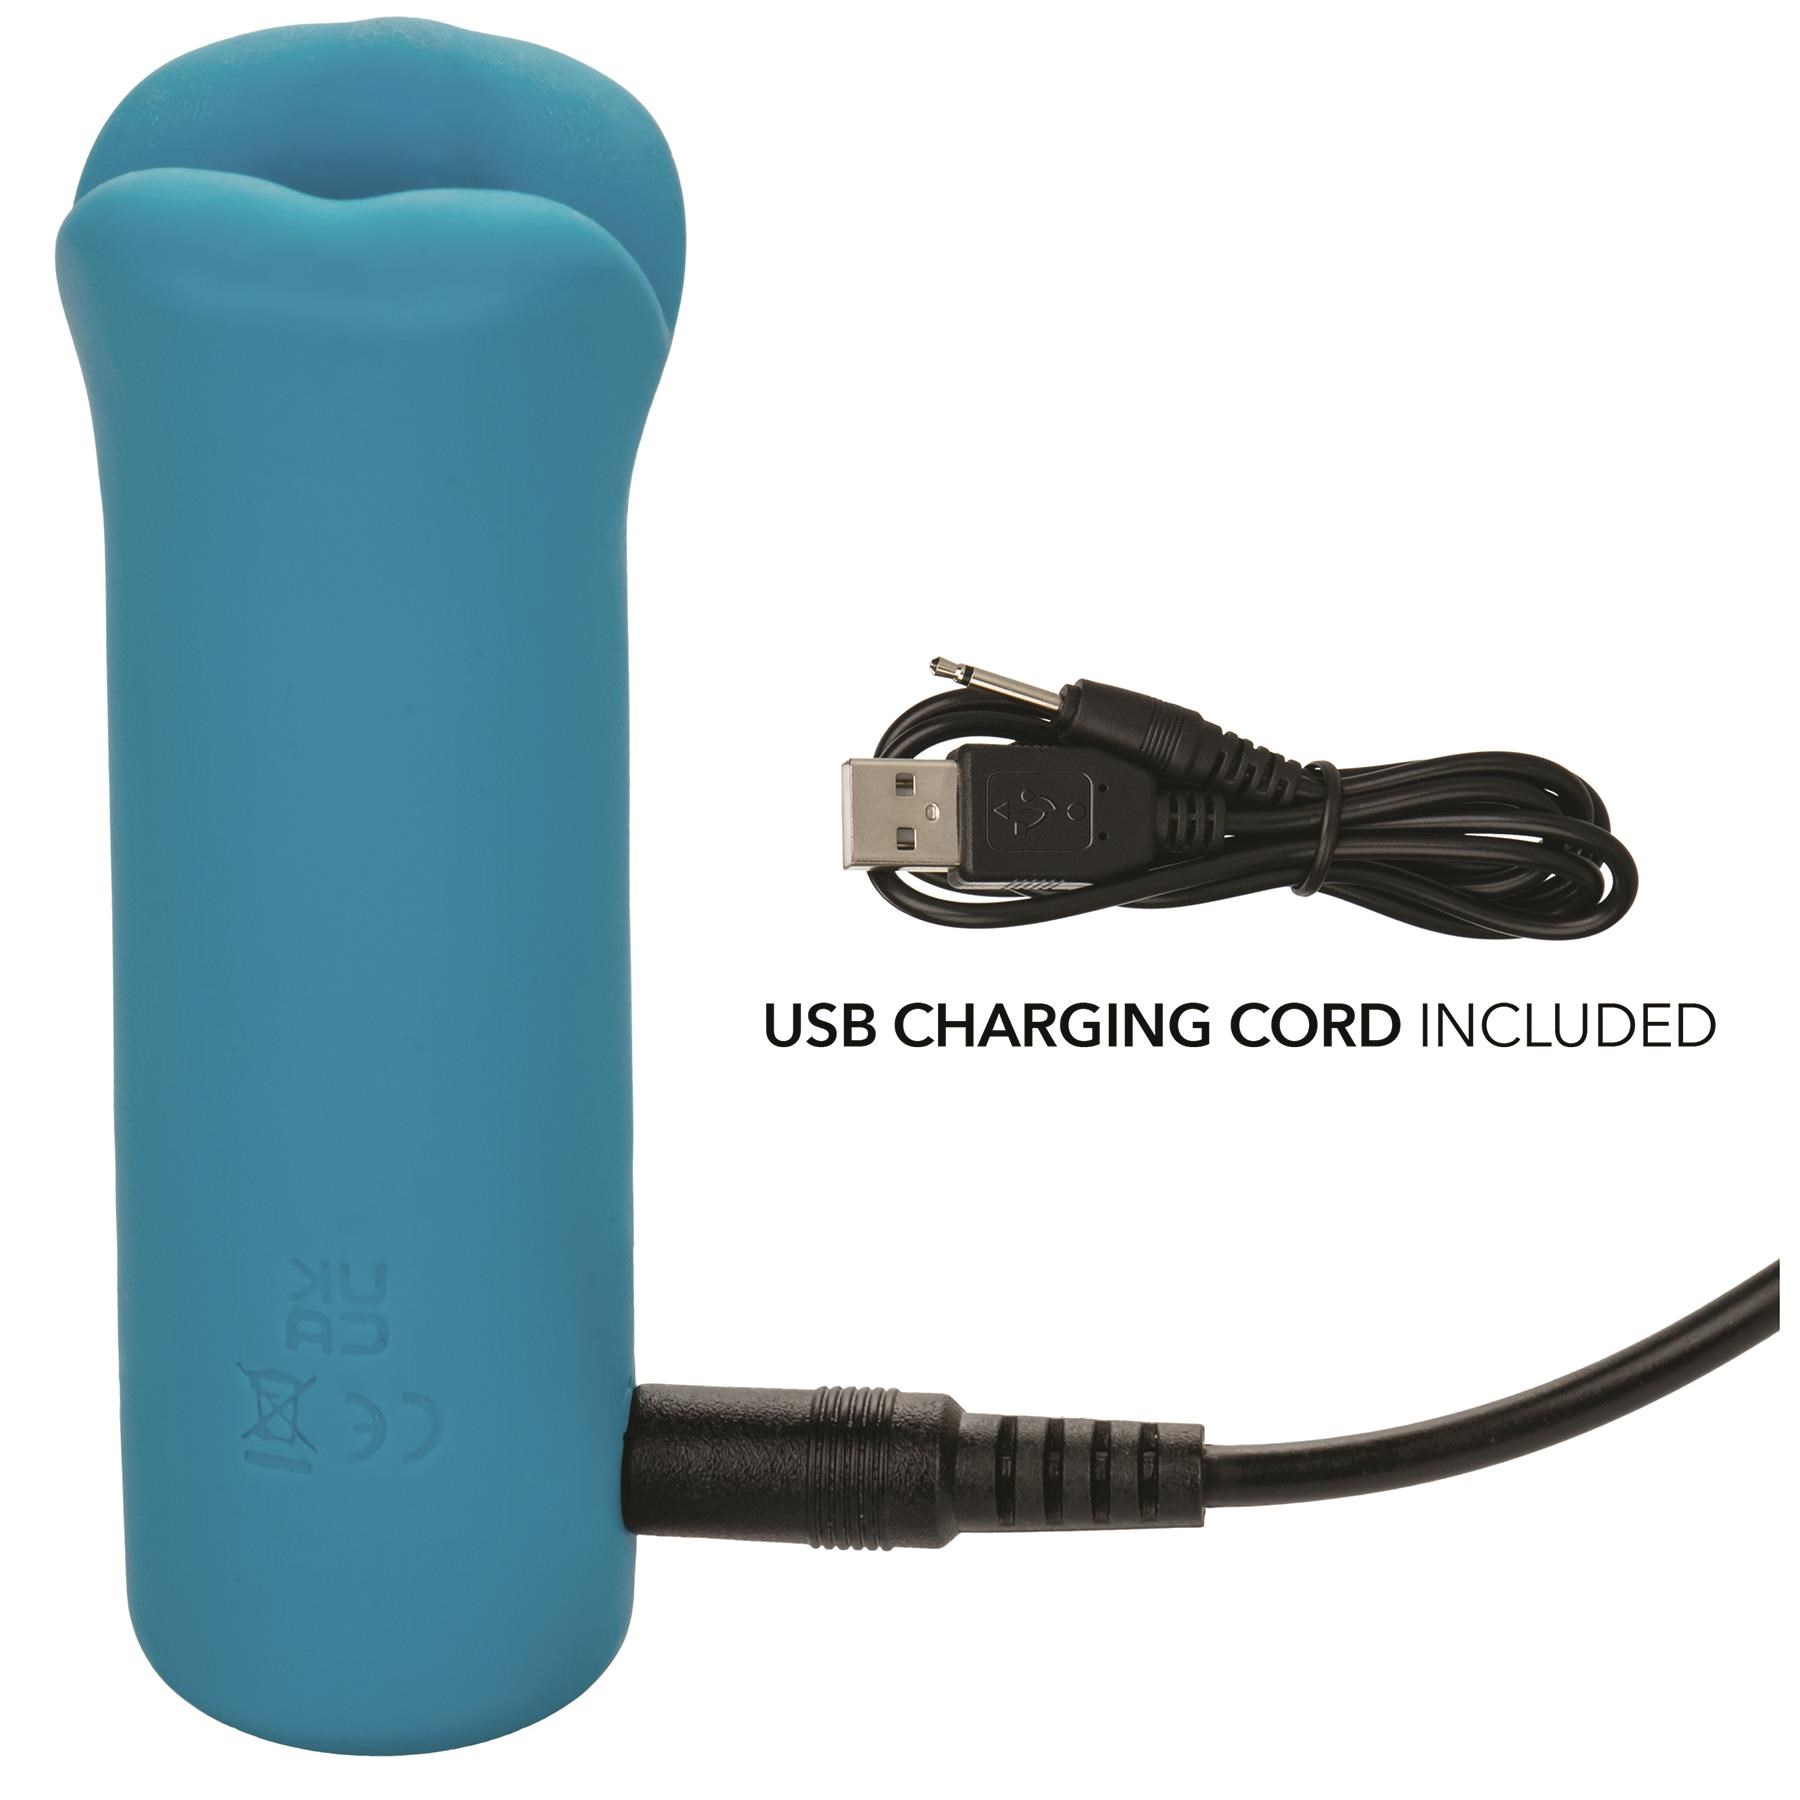 Kyst Lips Clitoral Massager - Showing Where Charging Cable is Placed